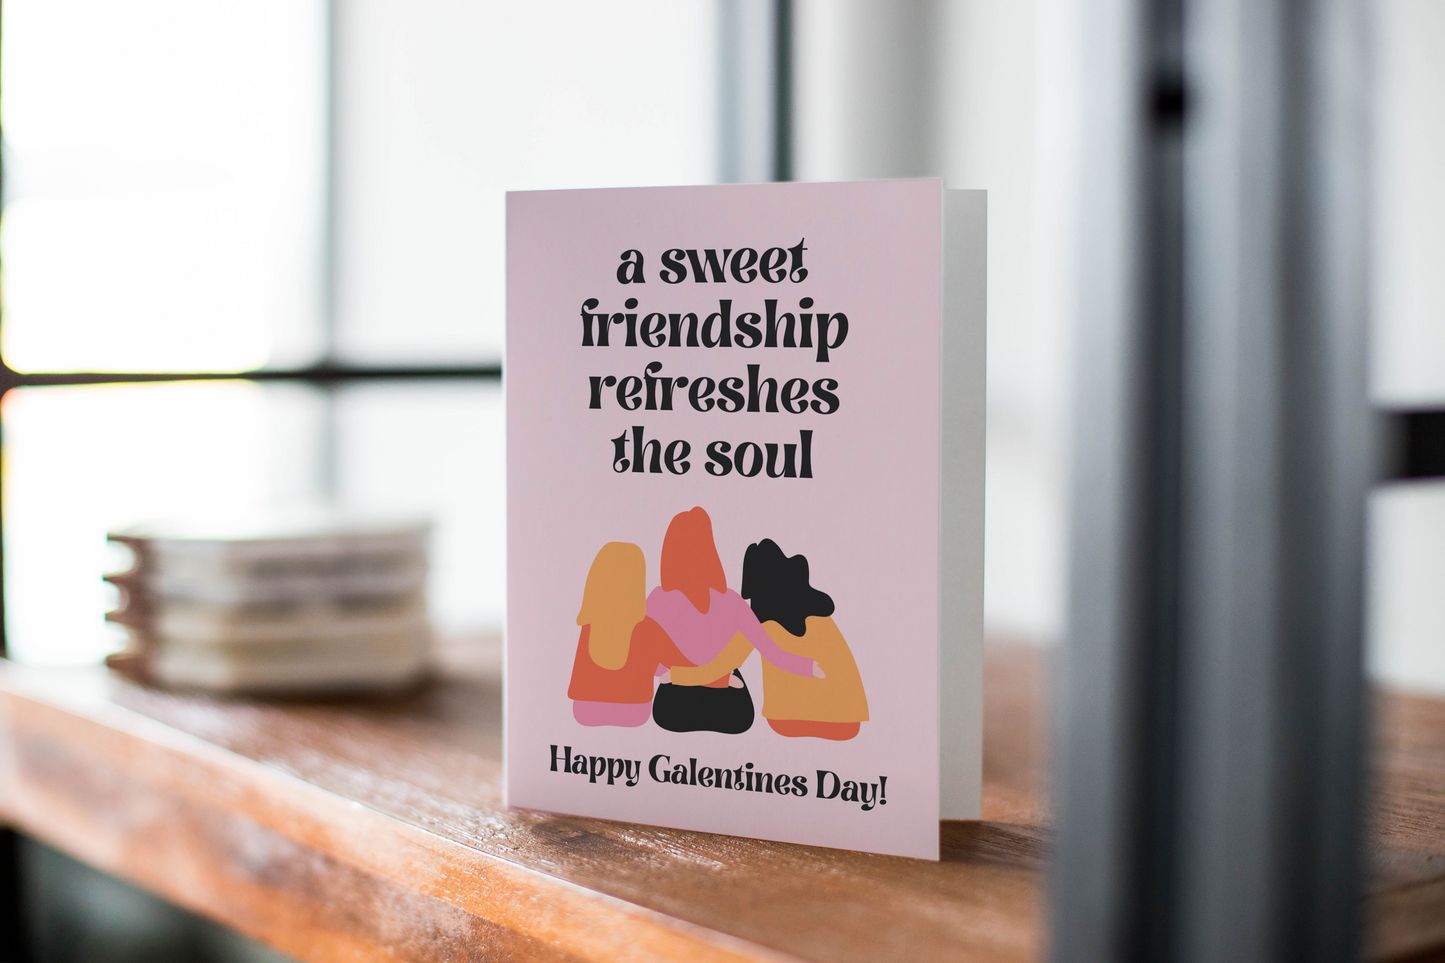 Happy Galentine's Day Greeting Card: A Sweet Friendship Refreshes the Soul.